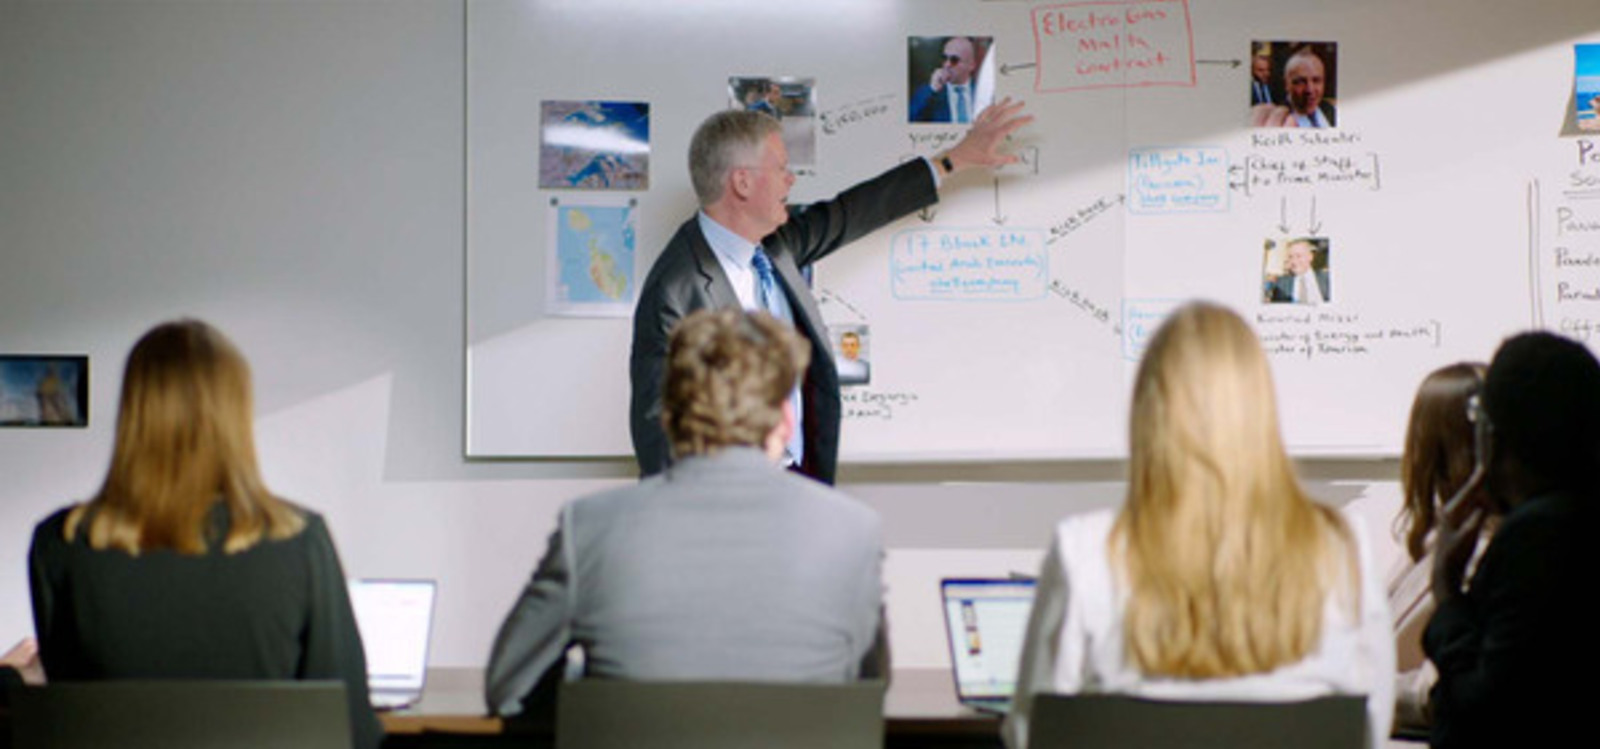 Thomas Kellenberg stands at a white board teaching a group of students